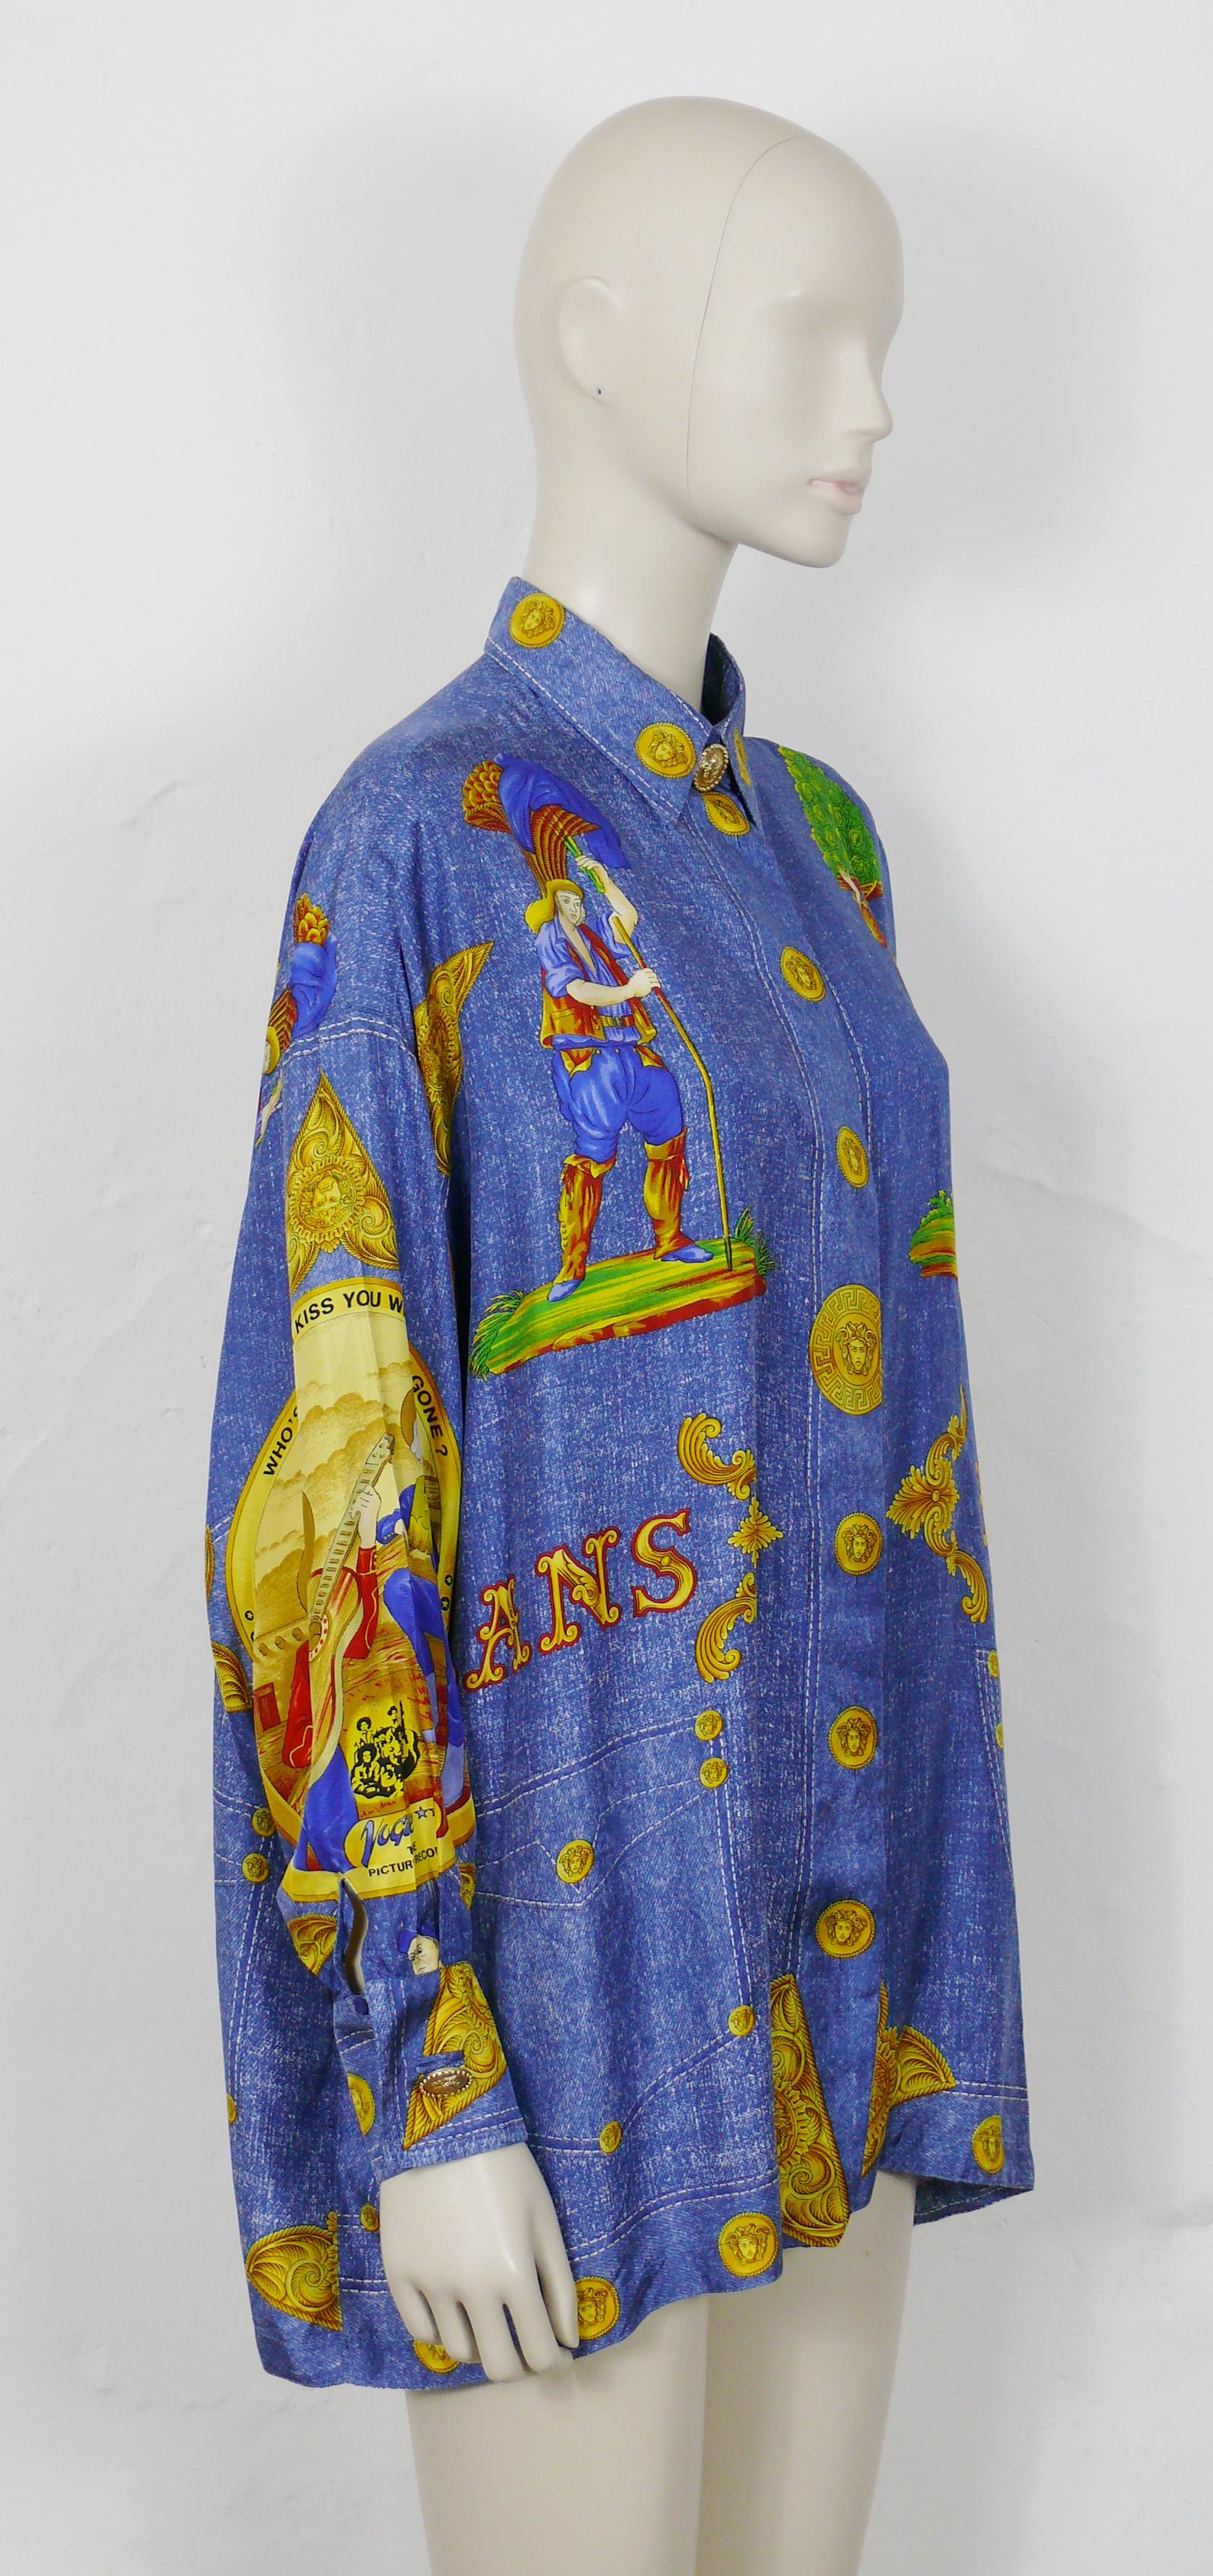 GIANNI VERSACE Couture vintage men's BLUE JEANS trompe l'oeil printed silk shirt.

Long sleeves.
Hidden front button closure.
Gold toned iconic Medusa buttons on collar and cuffs.

Label reads GIANNI VERSACE Couture Made in Italy.

Size tag reads :